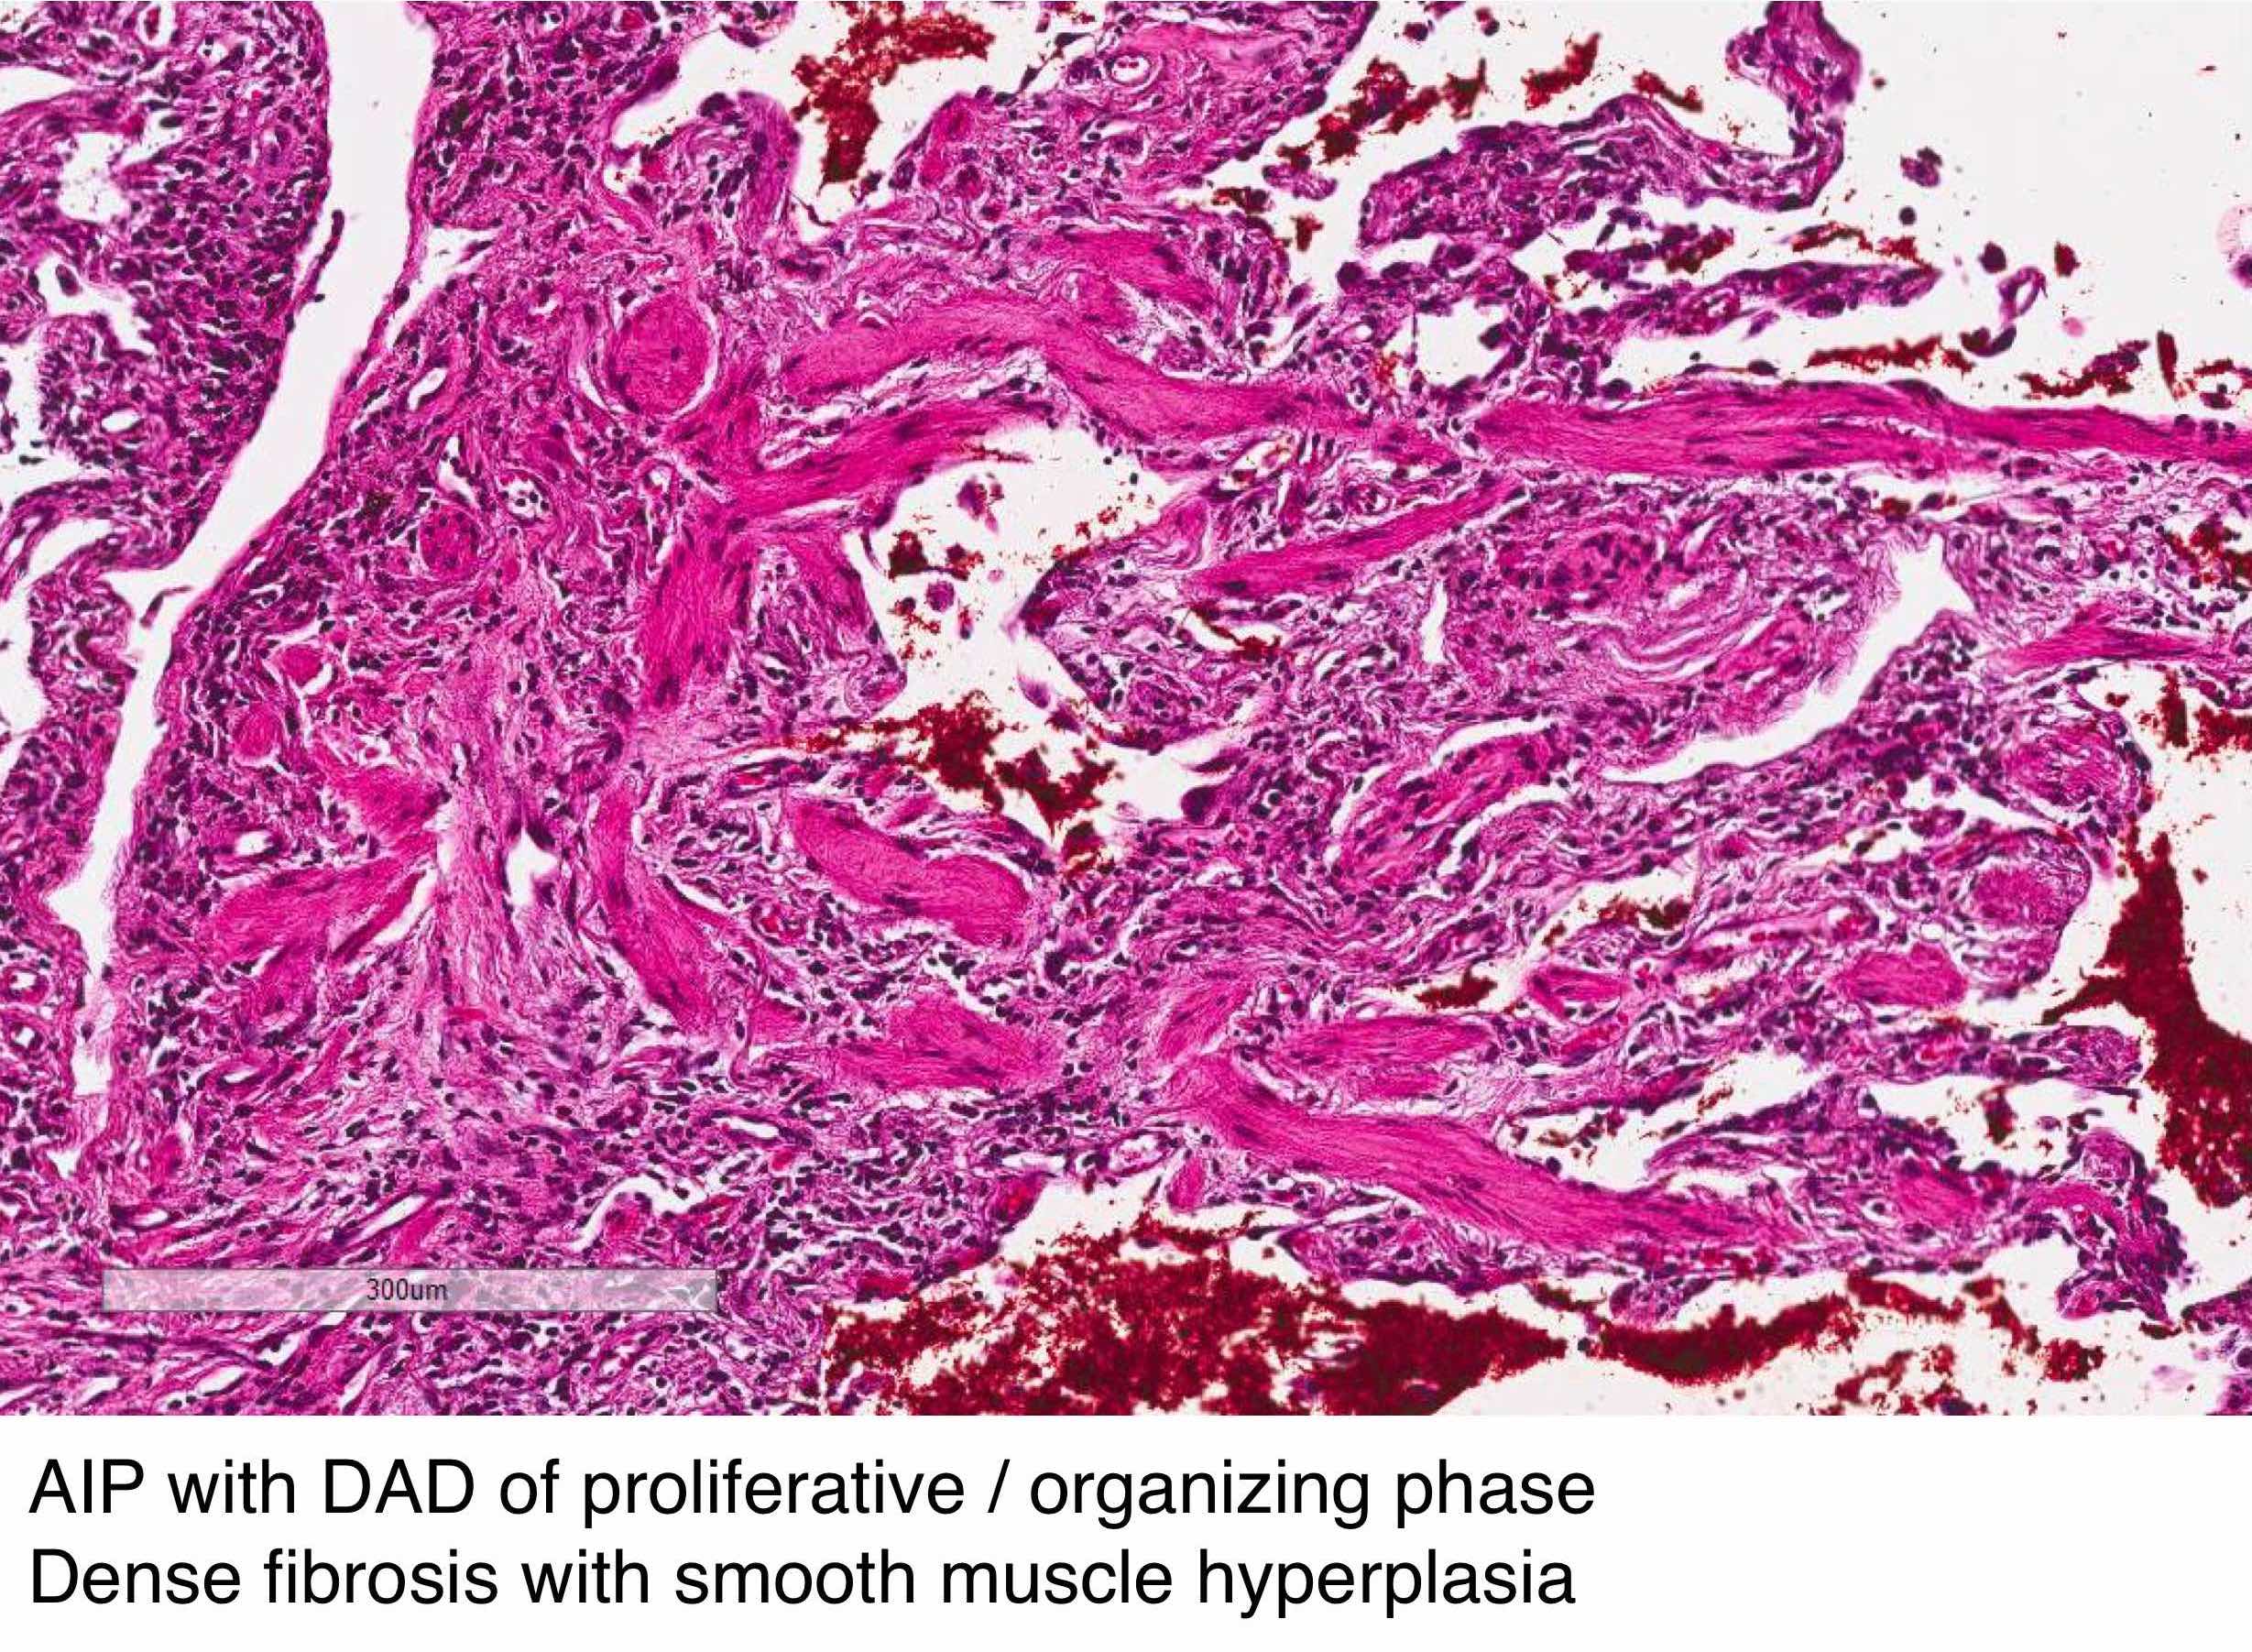 Dense fibrosis with smooth muscle hyperplasia